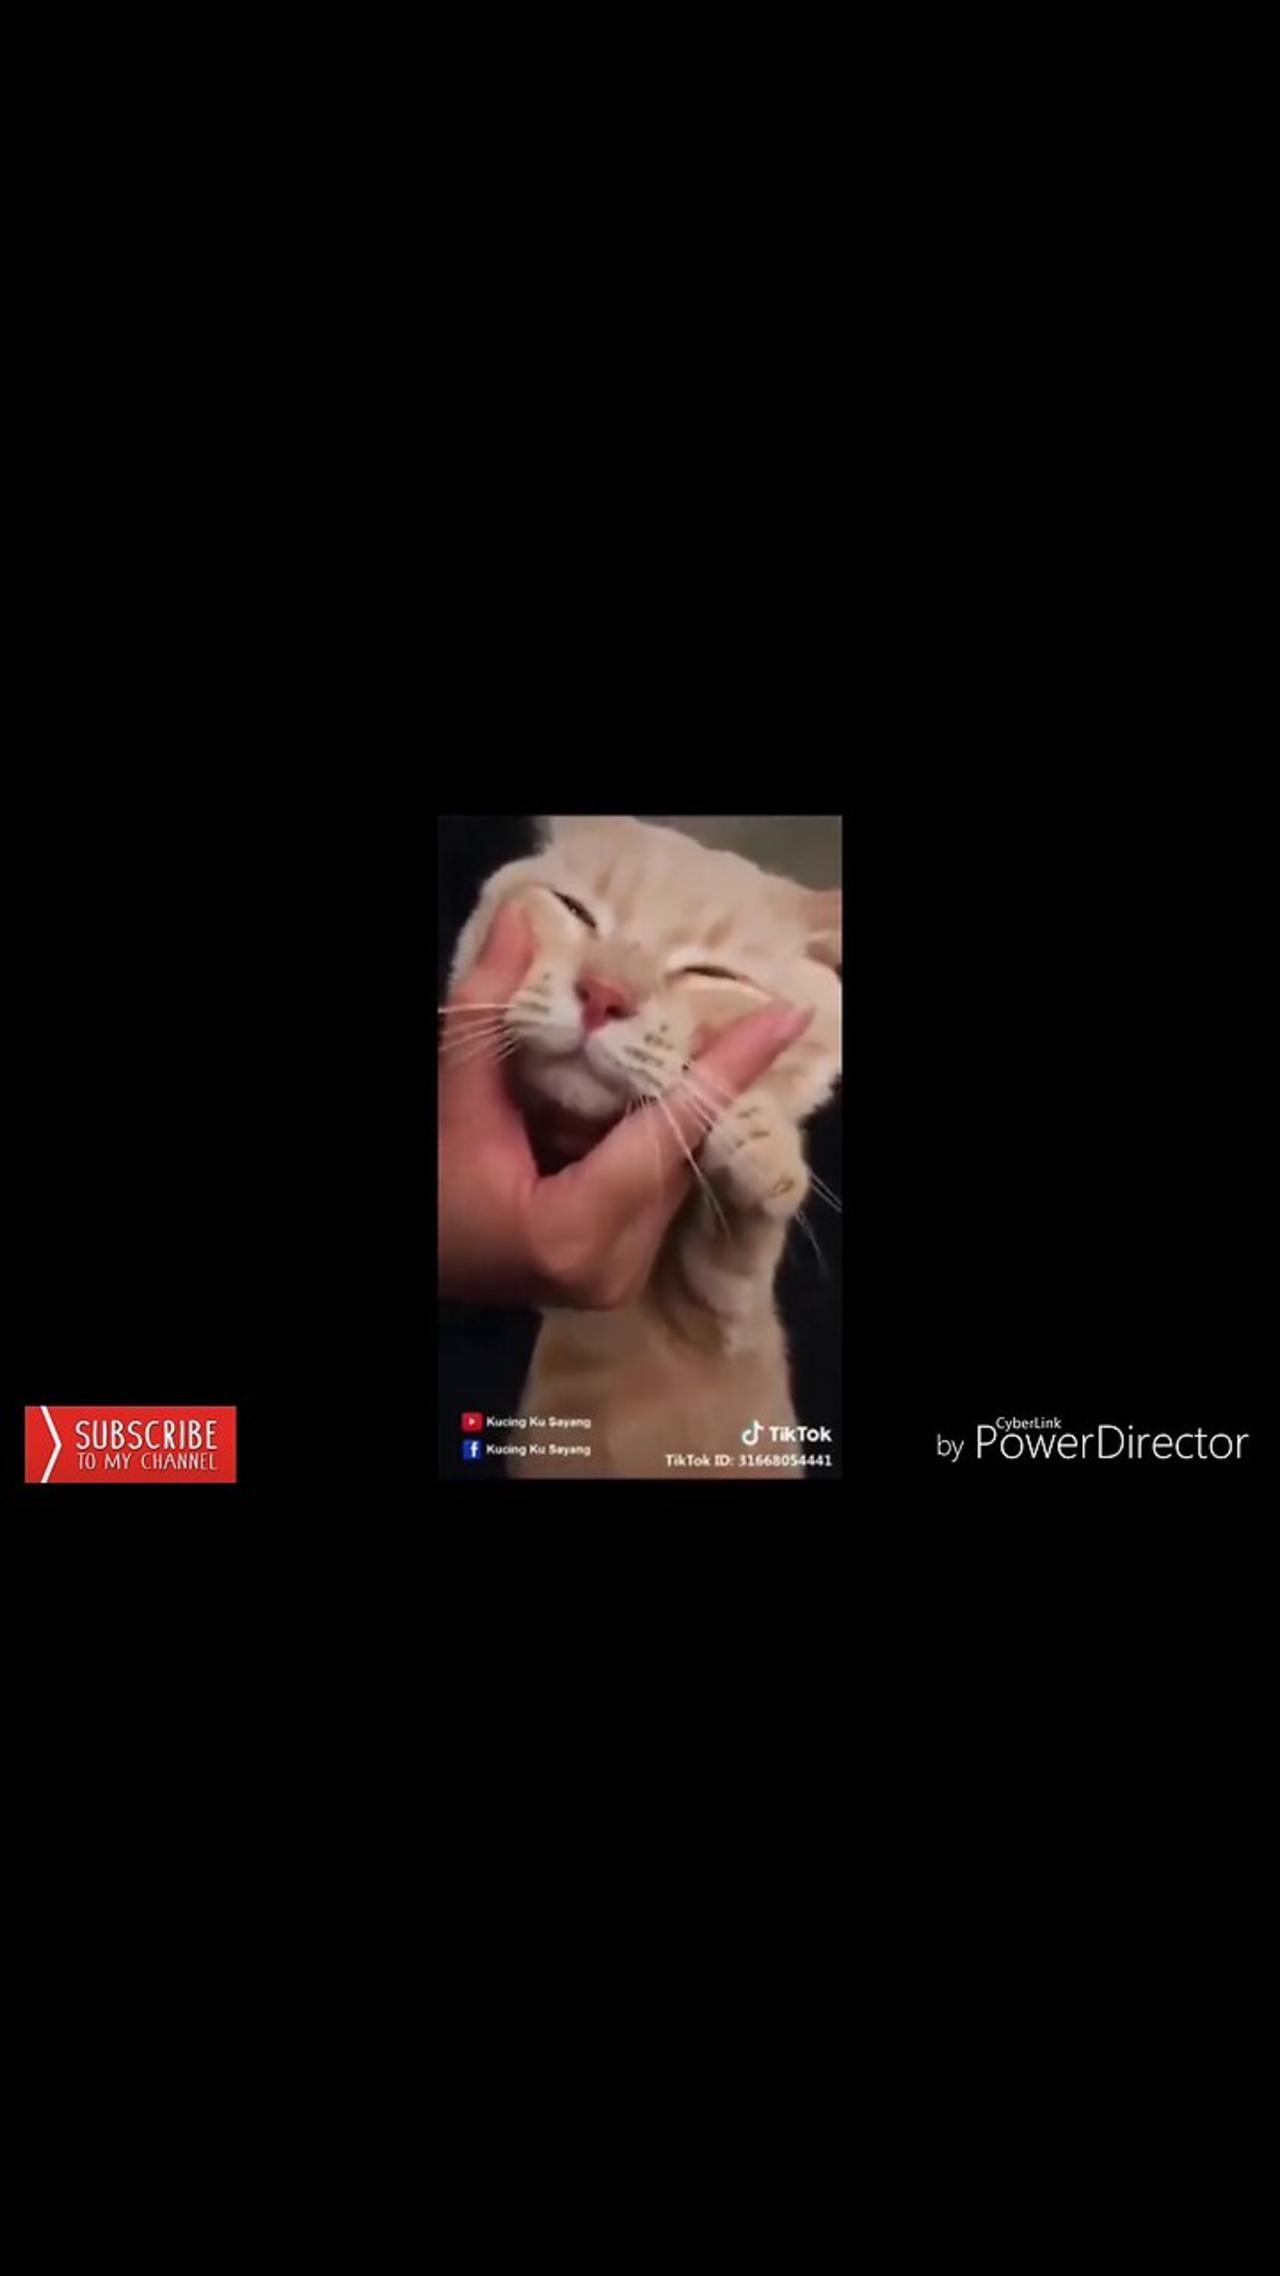 Best Funny Cat Videos | Funniest Cats | Funny Animal Videos | Best Services | #shorts #short